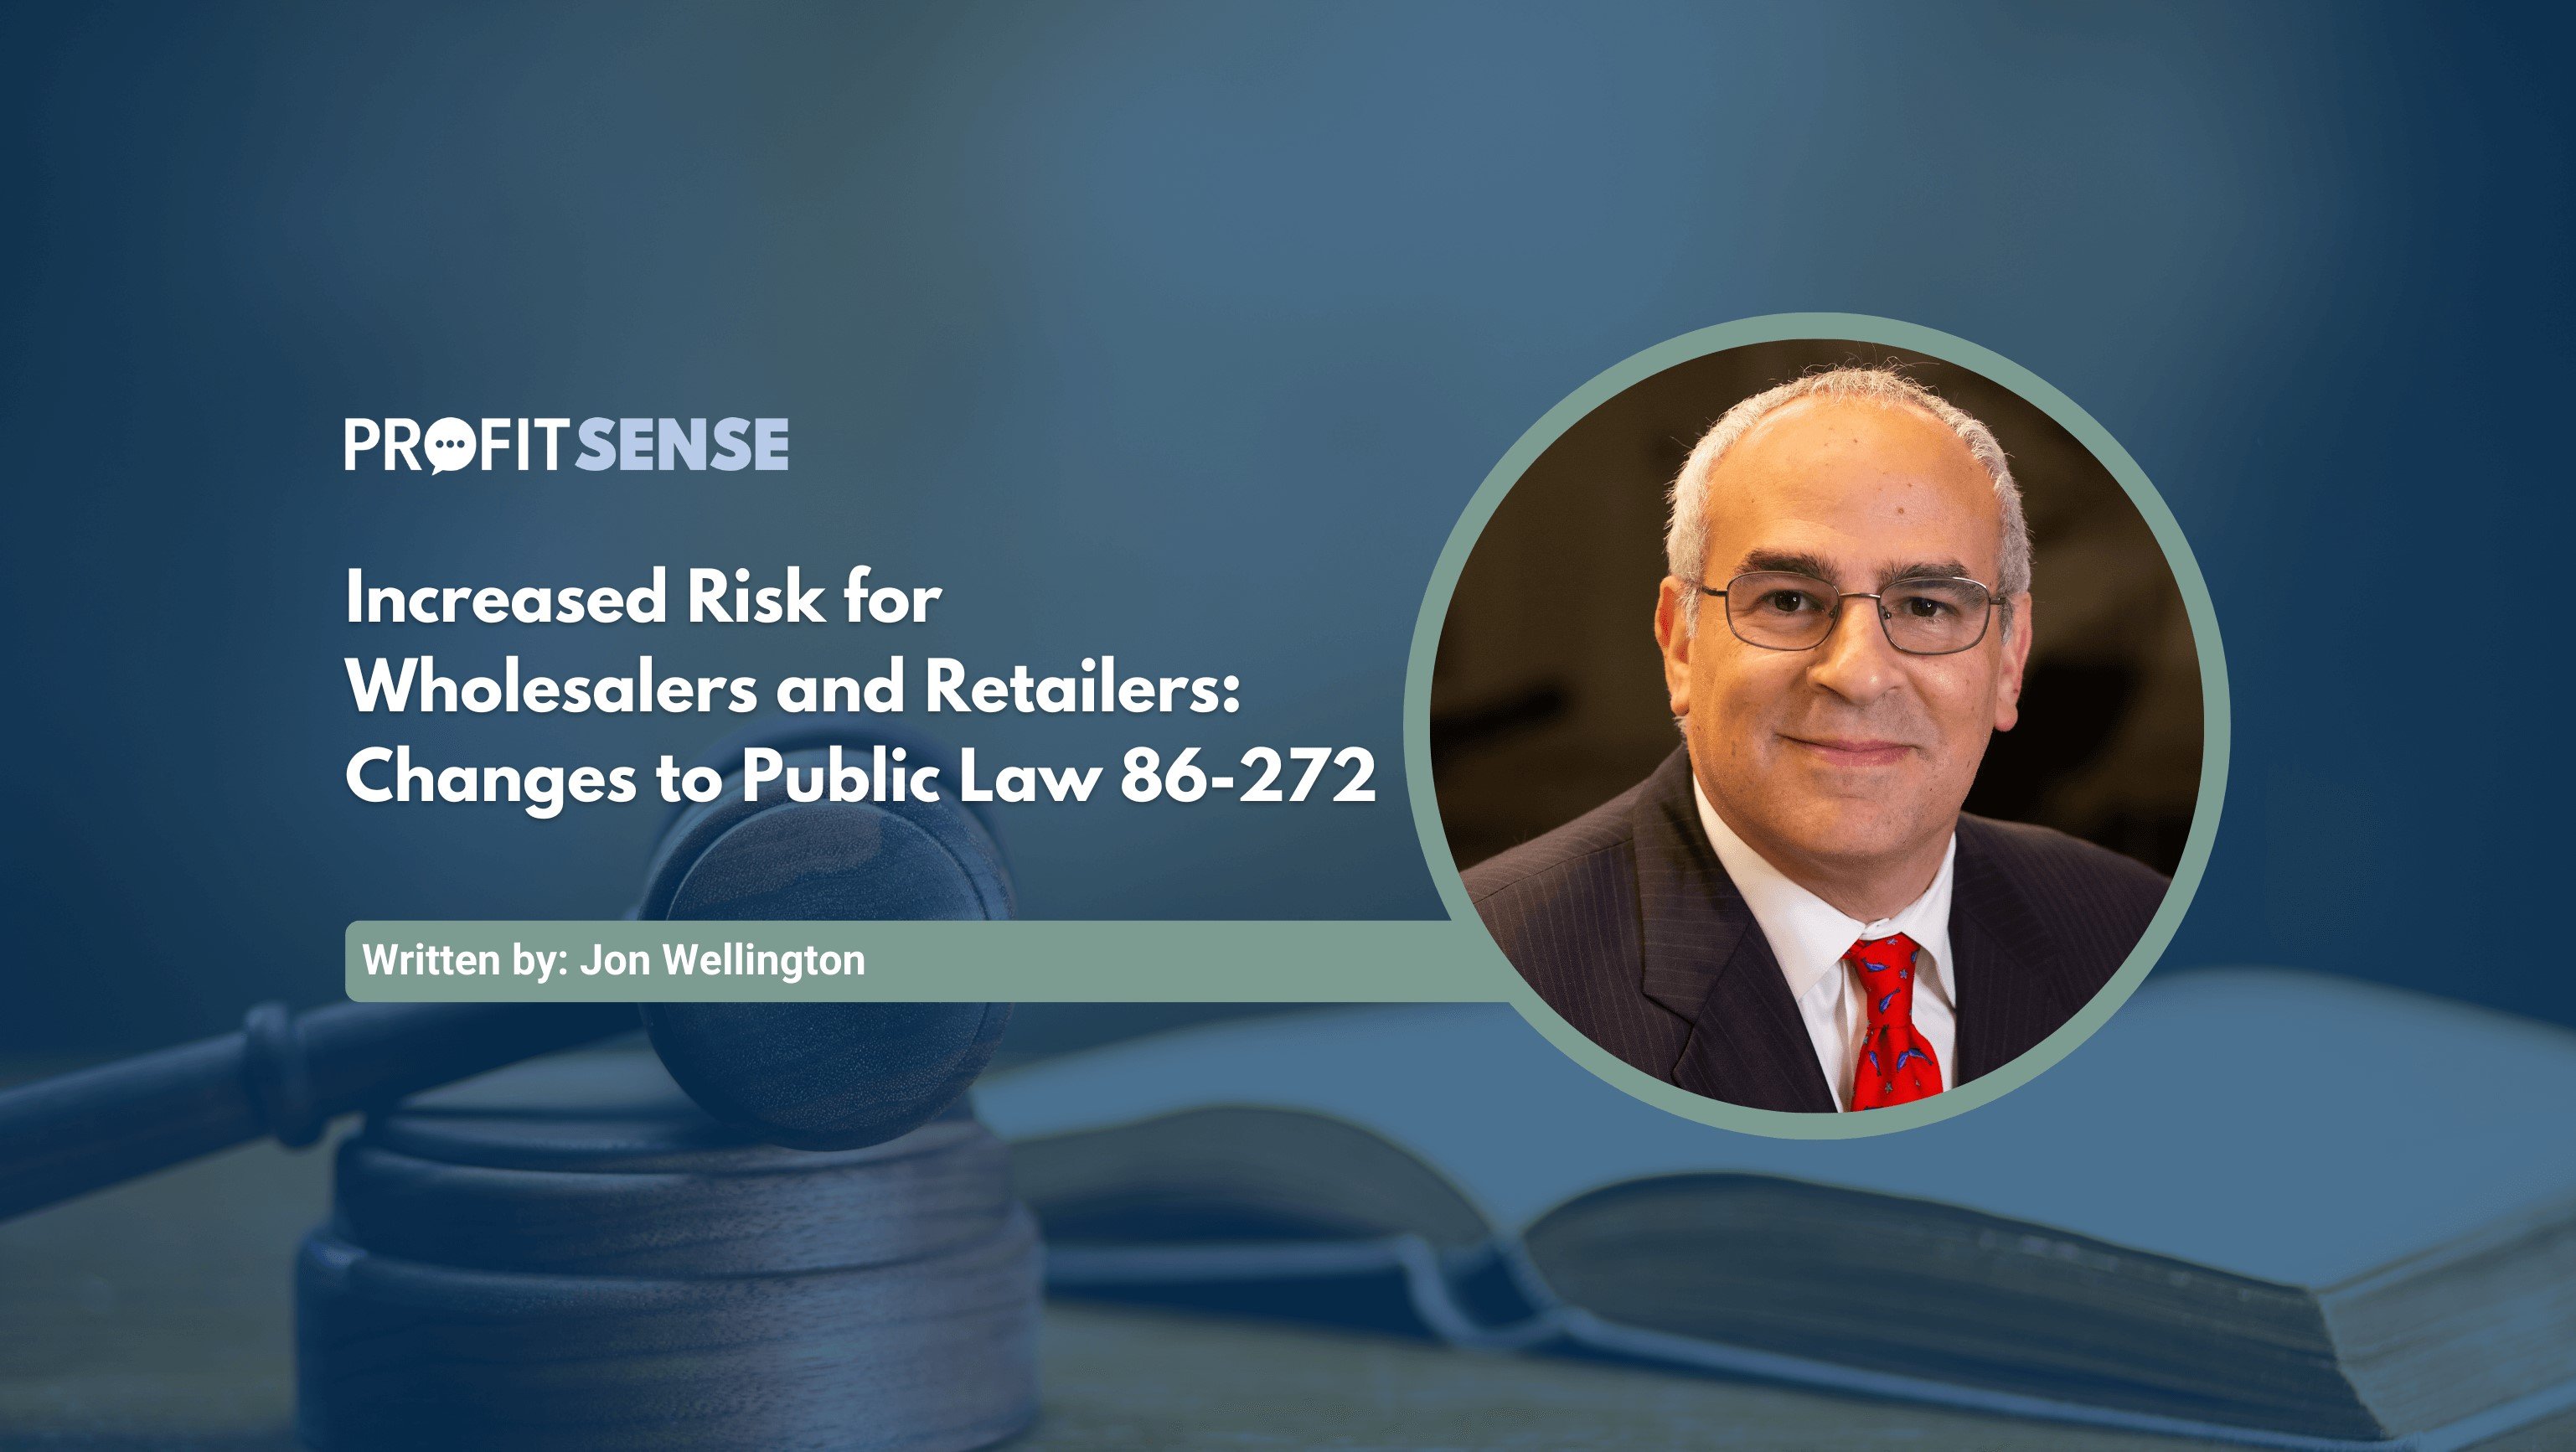 Increased Risk for Wholesalers and Retailers: Changes to Public Law 86-272